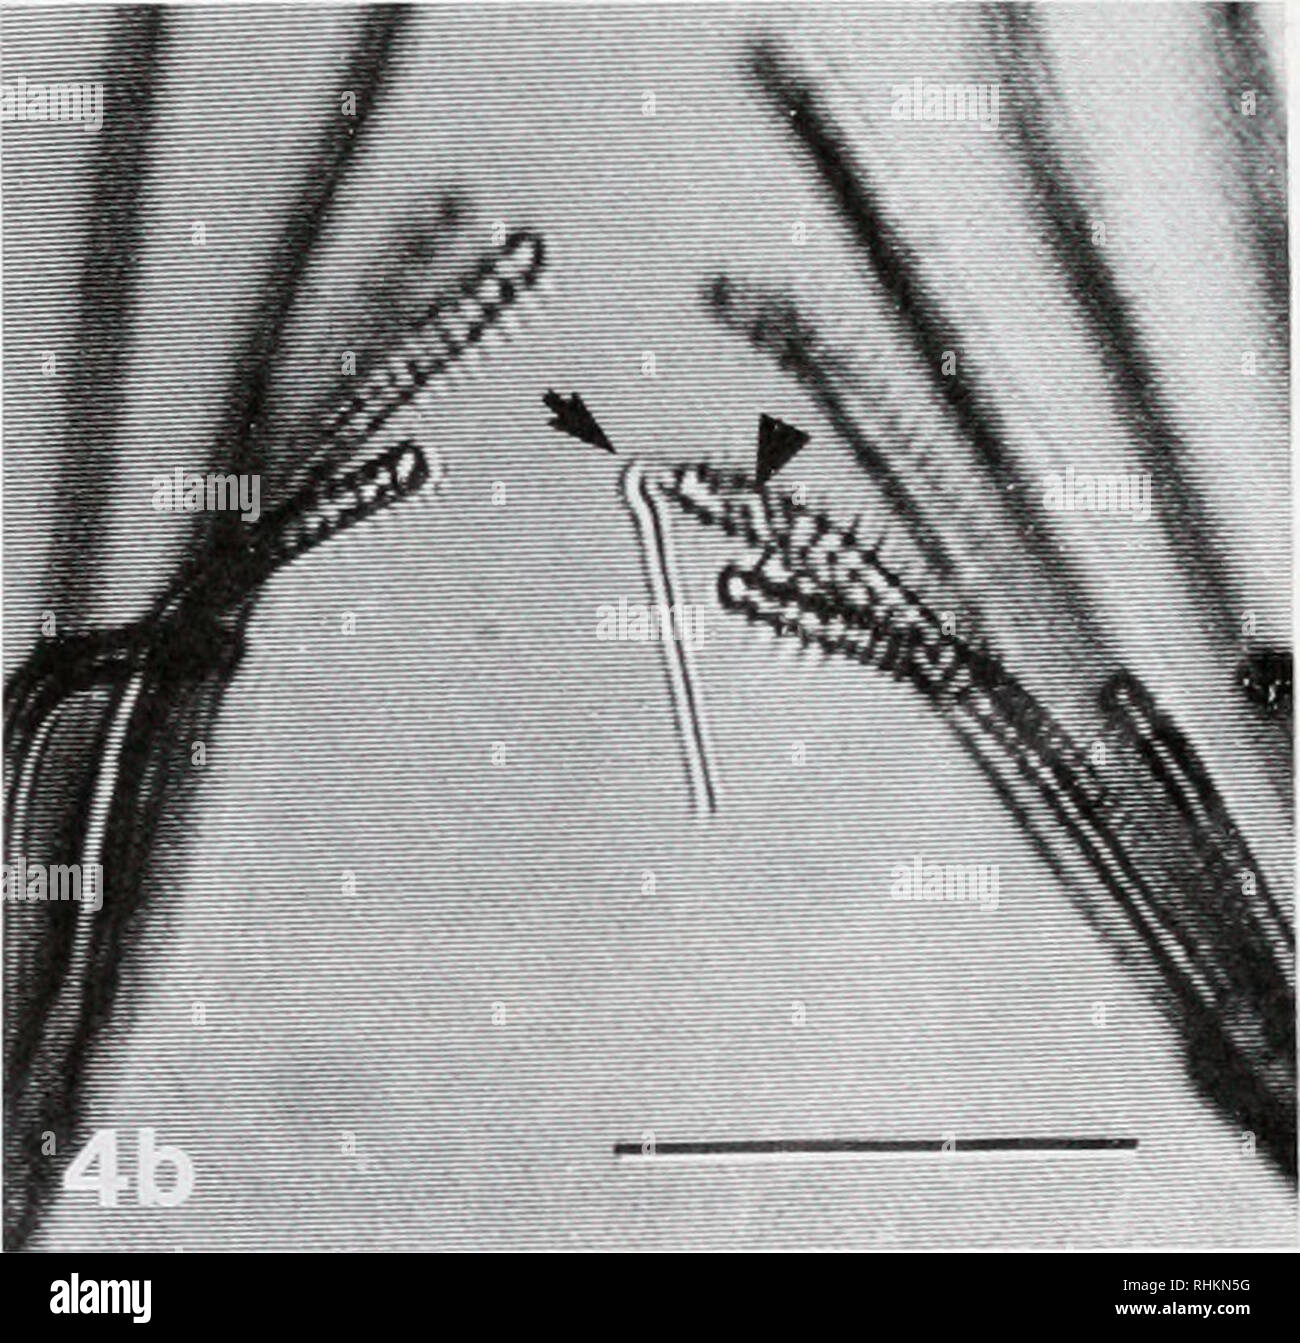 . The Biological bulletin. Biology; Zoology; Biology; Marine Biology. Figure 1. Differential interference contrast image of a partially disassociated spetmatozeugma. The arrow indicates the head regions of spermatozoa that have remained joined. The tail region of the spermatozeugma has remained intact. Scale bar = 12 jim. Figure 2. Video image of spermatozeugmata (arrow) and a primary oocyte (O) positioned between the pharynx (PH) and body wall of an extended polypide. The intertentacular organ (ITO) consists of a proximal and distal chamber. Scale bar = 50 /itn. Figure 3. A video image of thr Stock Photo